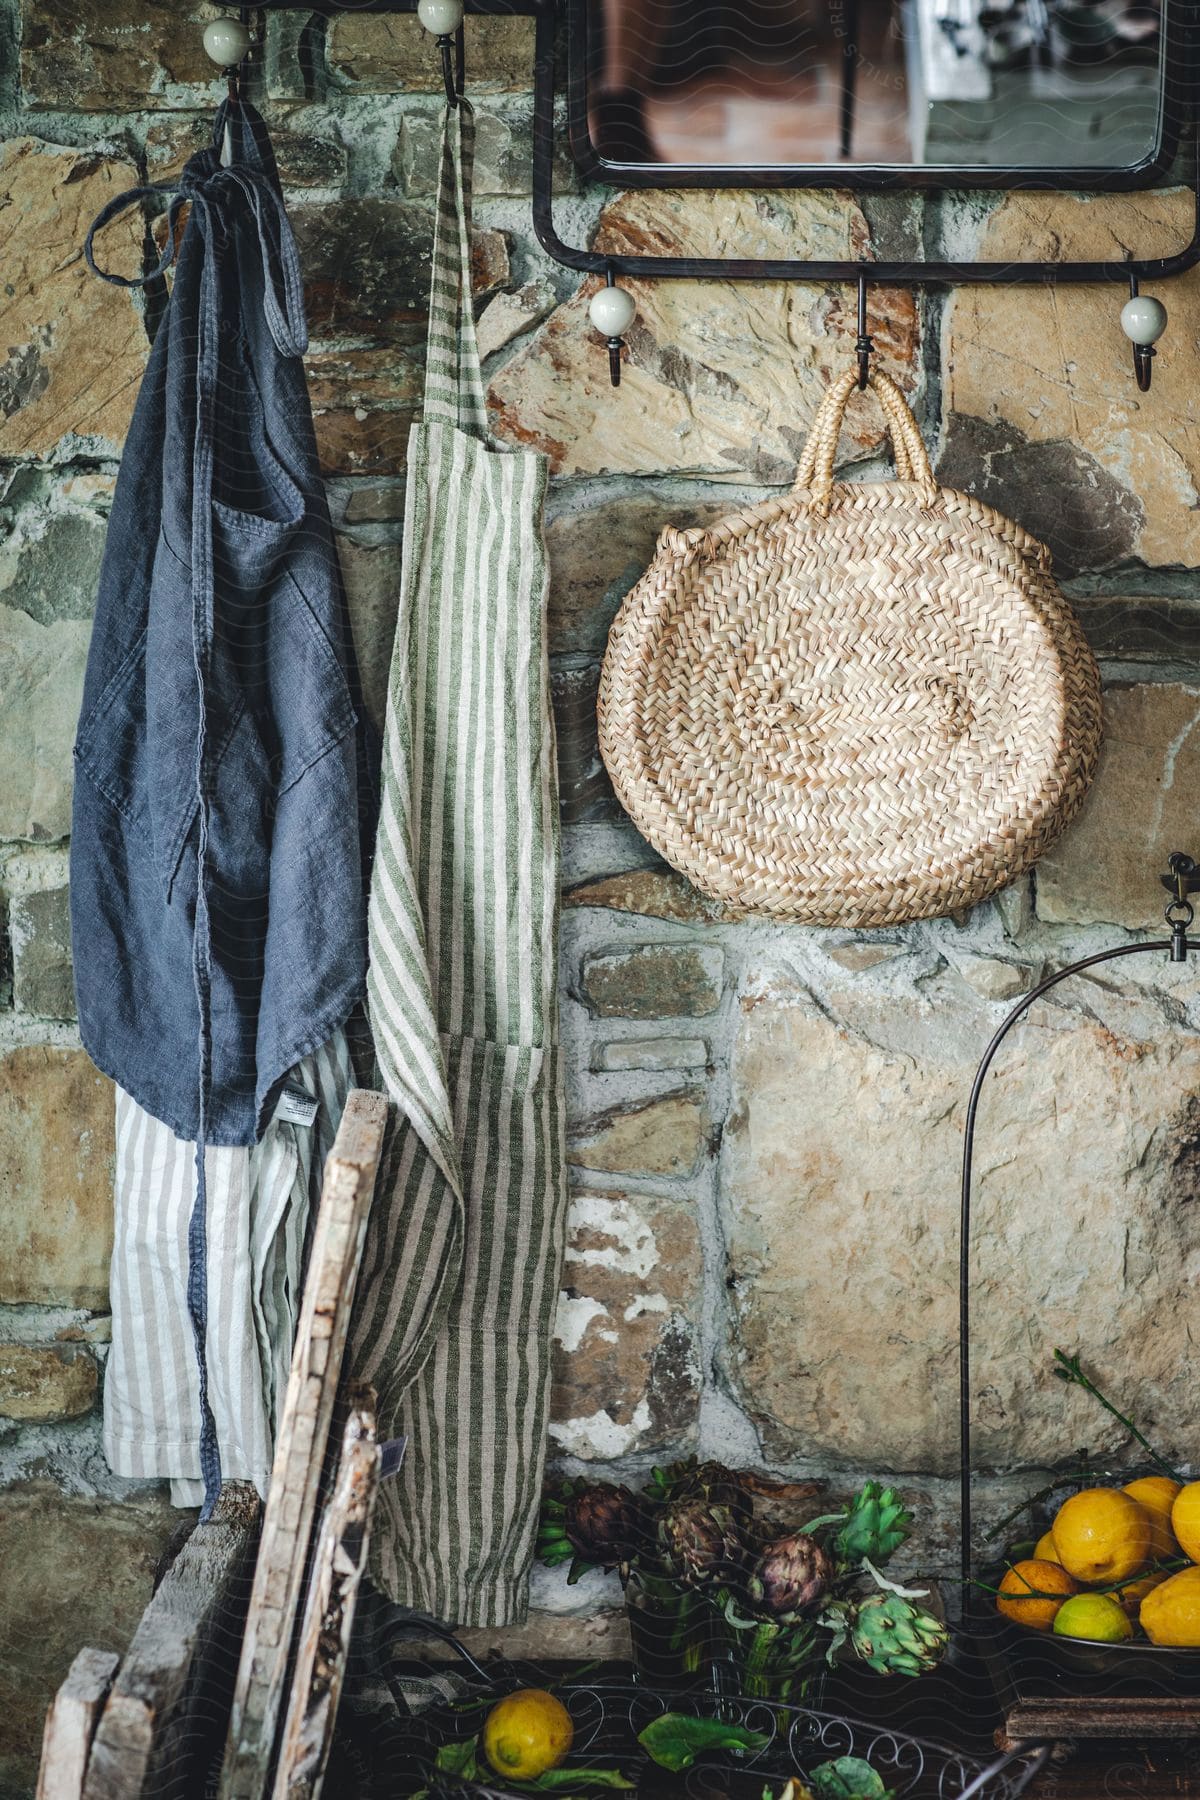 Aprons and baskets hanging from the wall in a rural kitchen